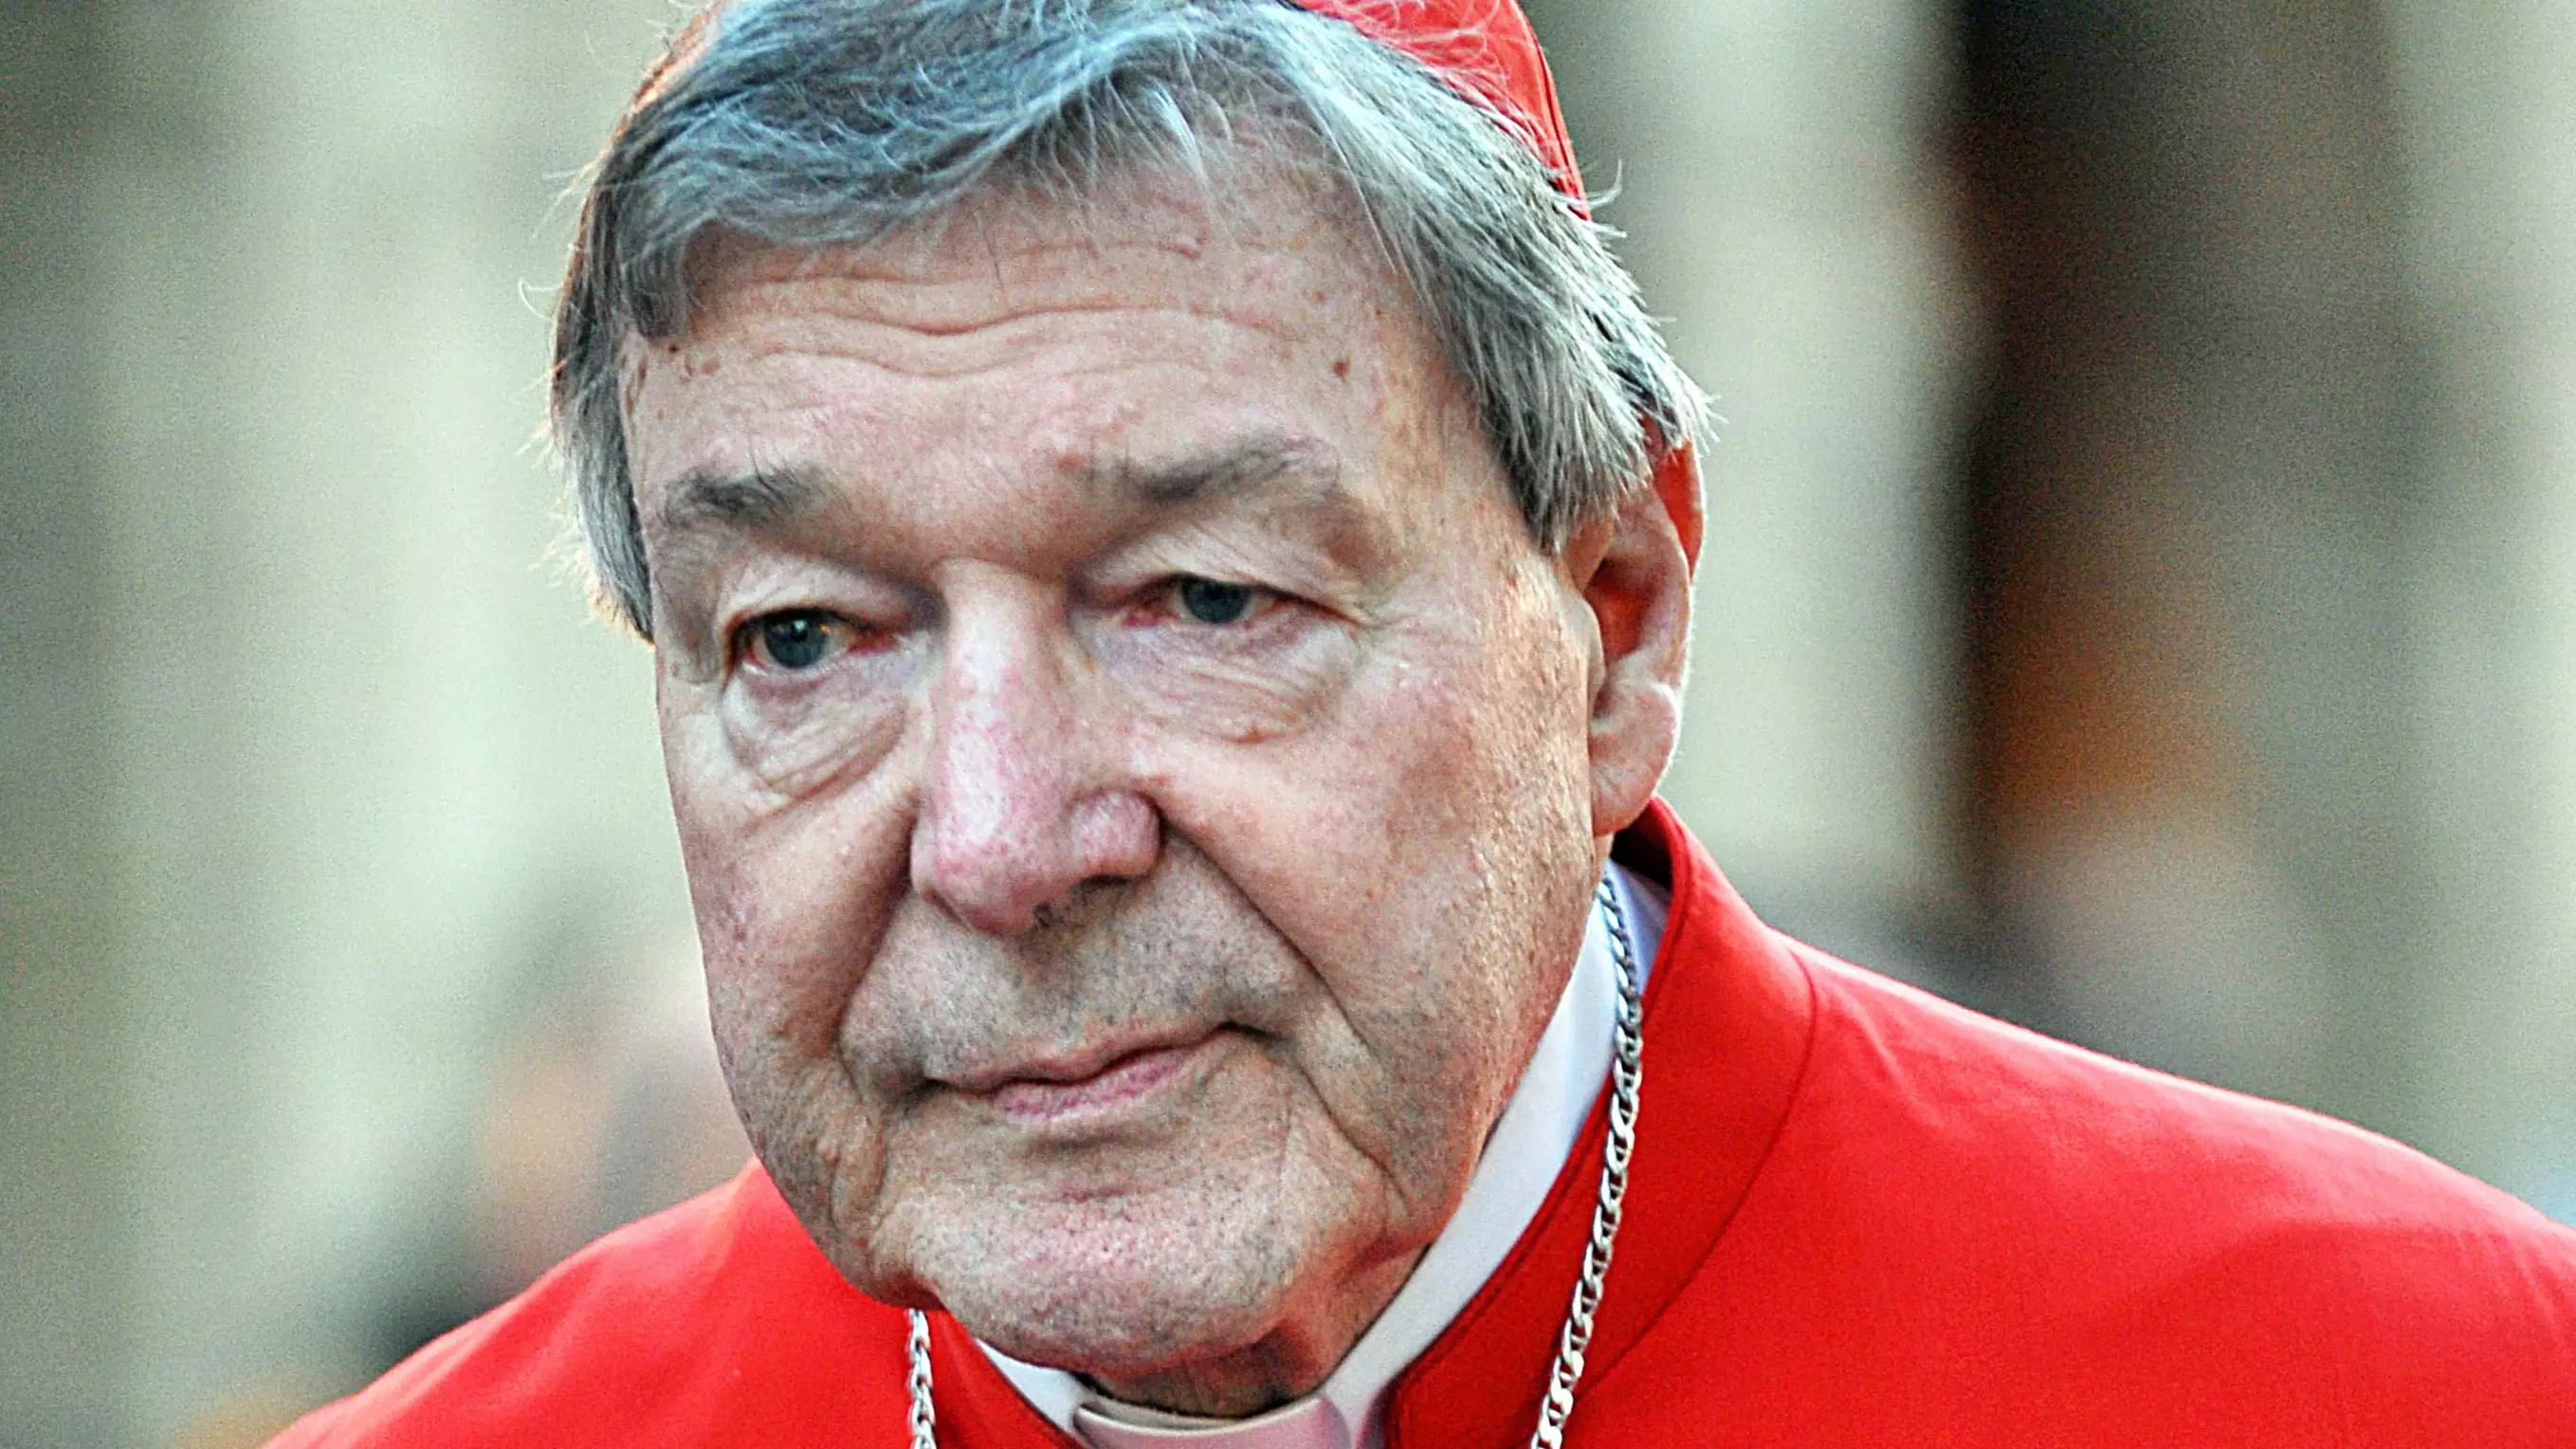 Cardinal George Pell Releases Statement After High Court Grants His Freedom From Prison